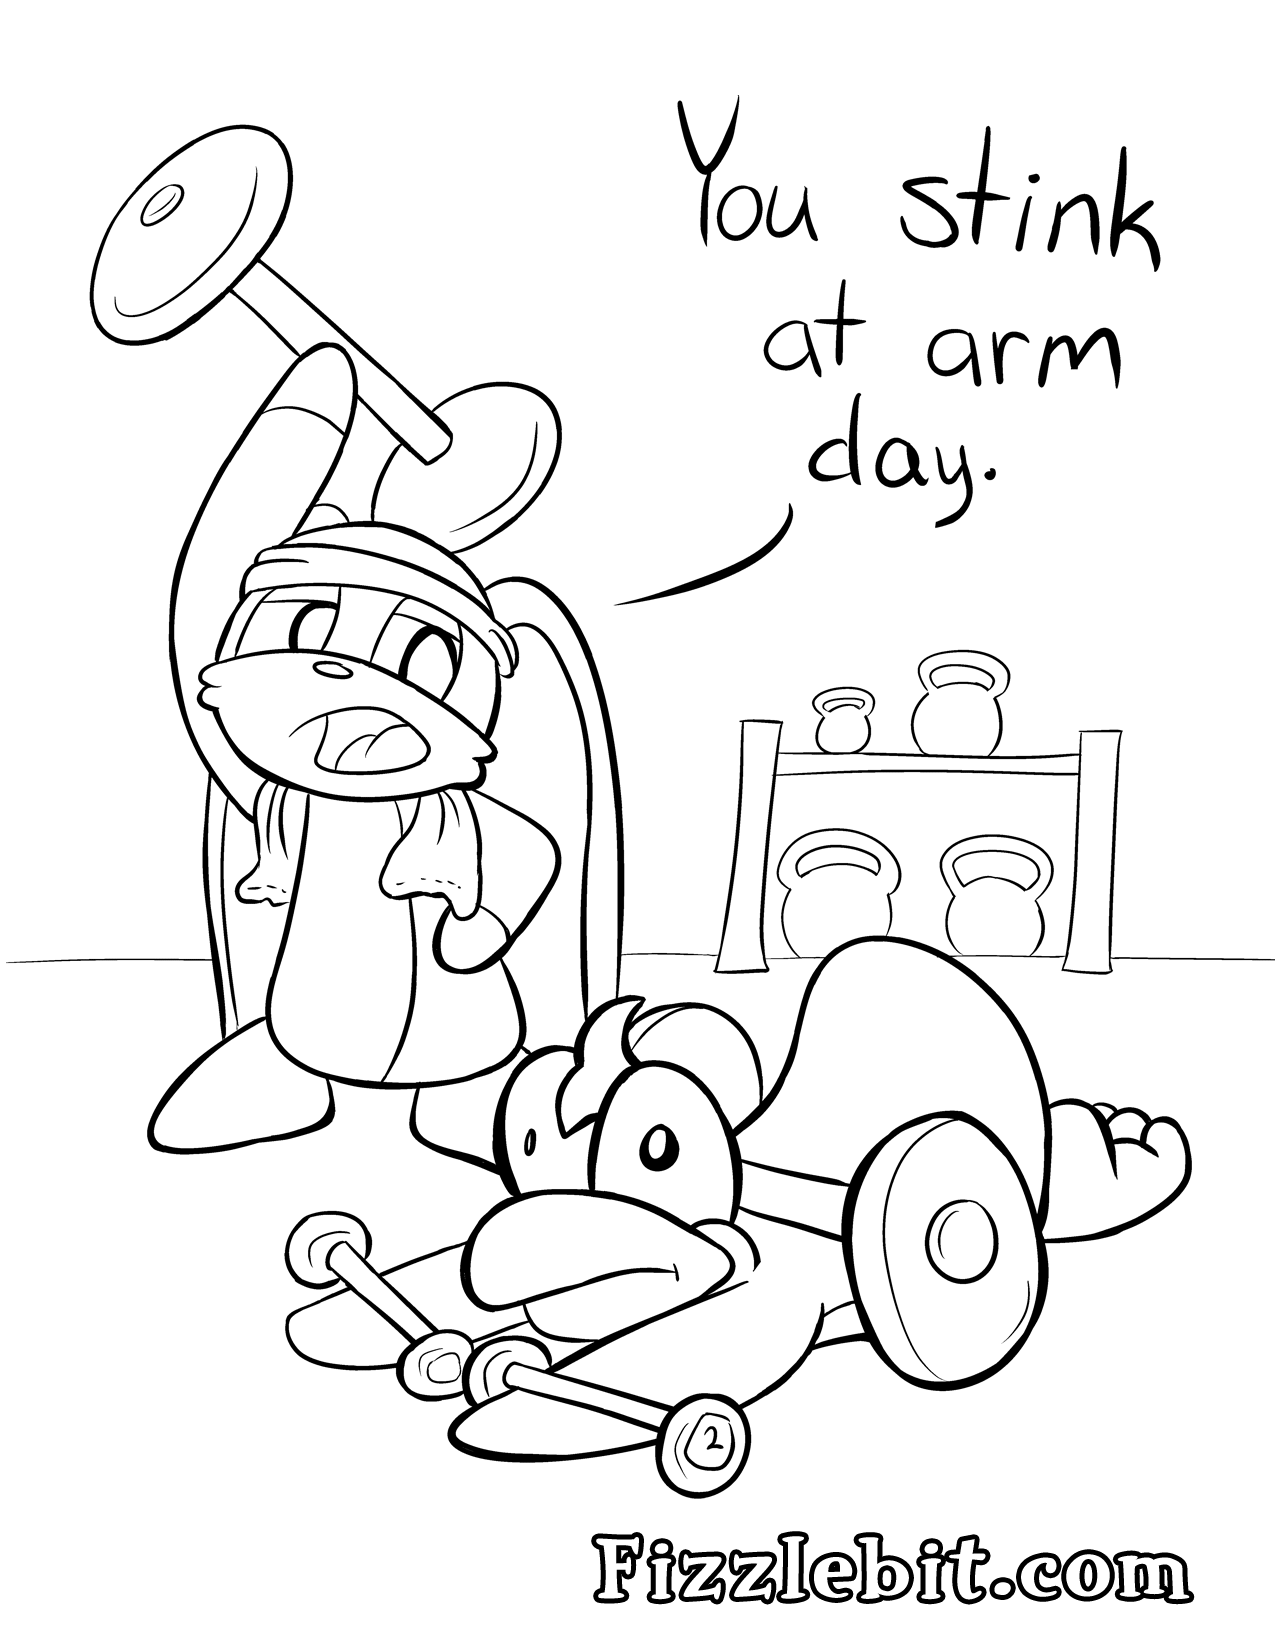 Coloring page of McTuffin being GREAT at Arm Day (Fizzlebit, not so much)